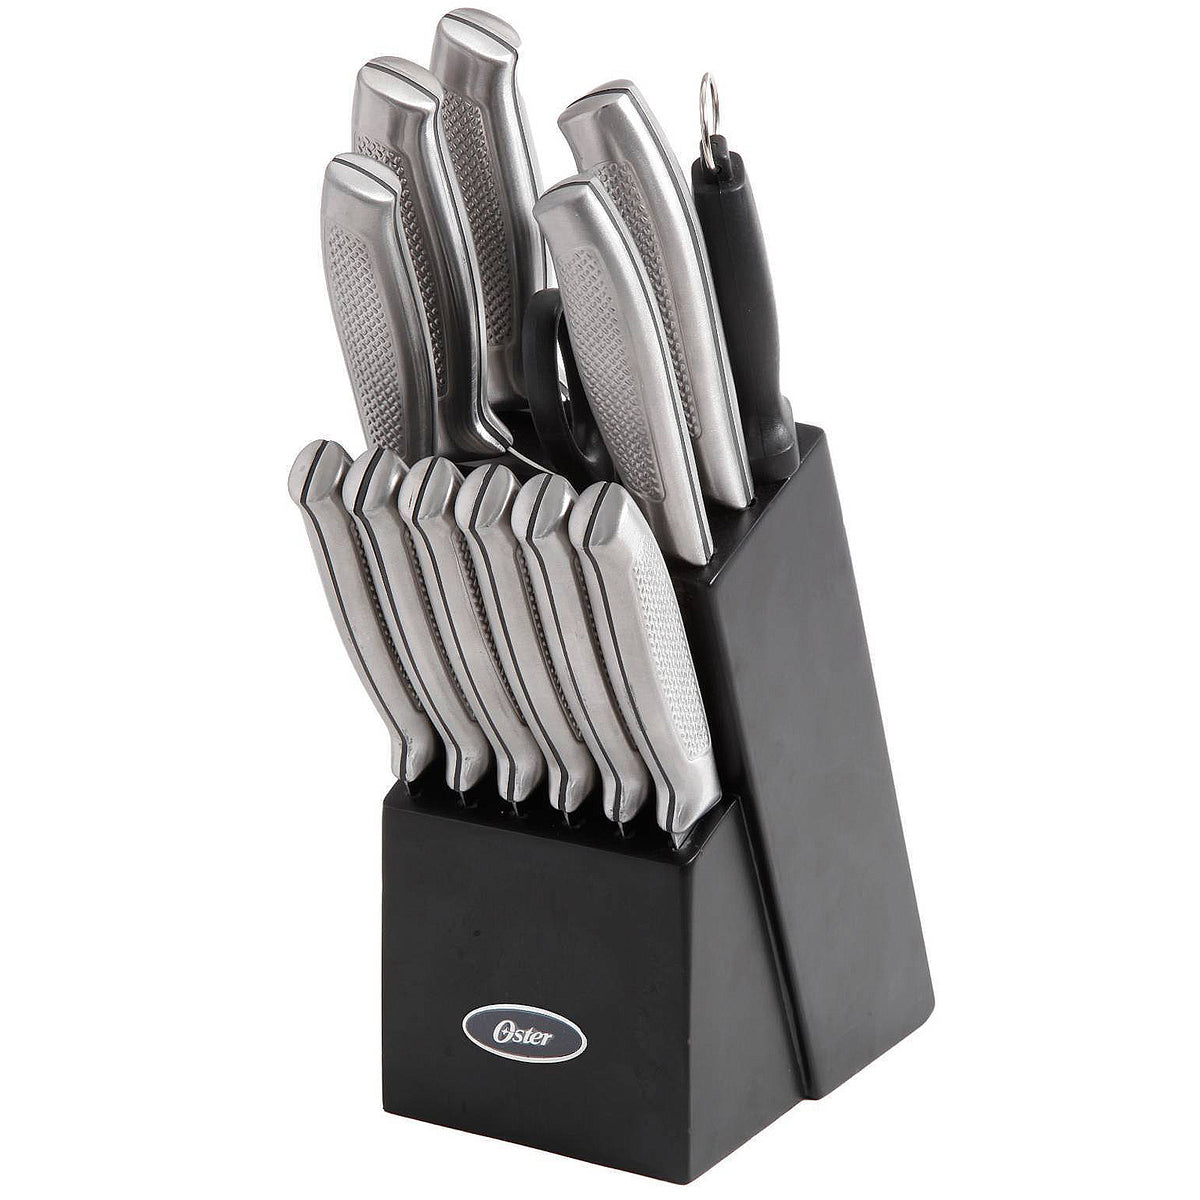 Oster Edgefield 14 Piece Stainless Steel Cutlery Knife Set with Black Knife Block